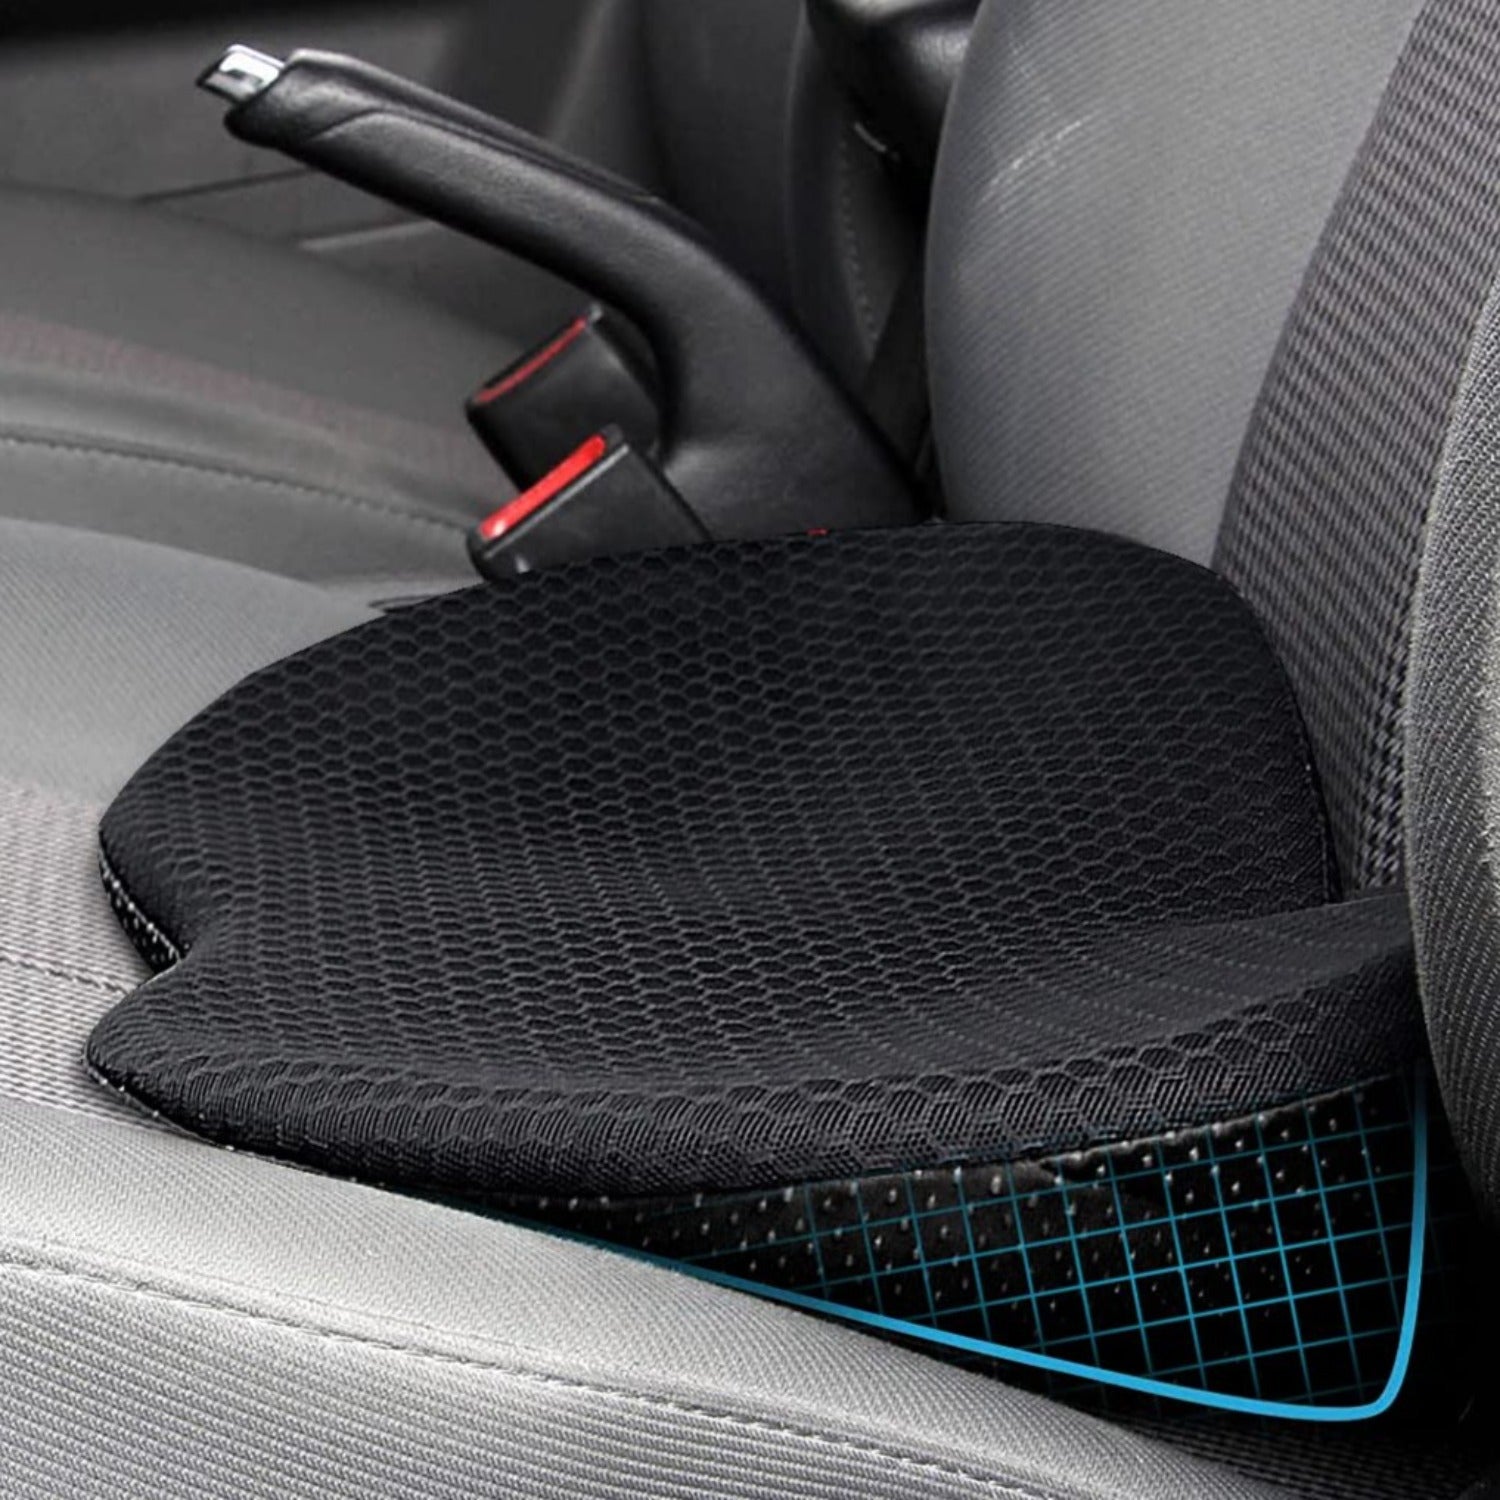 Getphonery Car Seat Cushion for Shorter Drivers Booster Height Riser Adults Short Person Wedge Back Pain Lumbar Support Driving Truck Pillow, Black